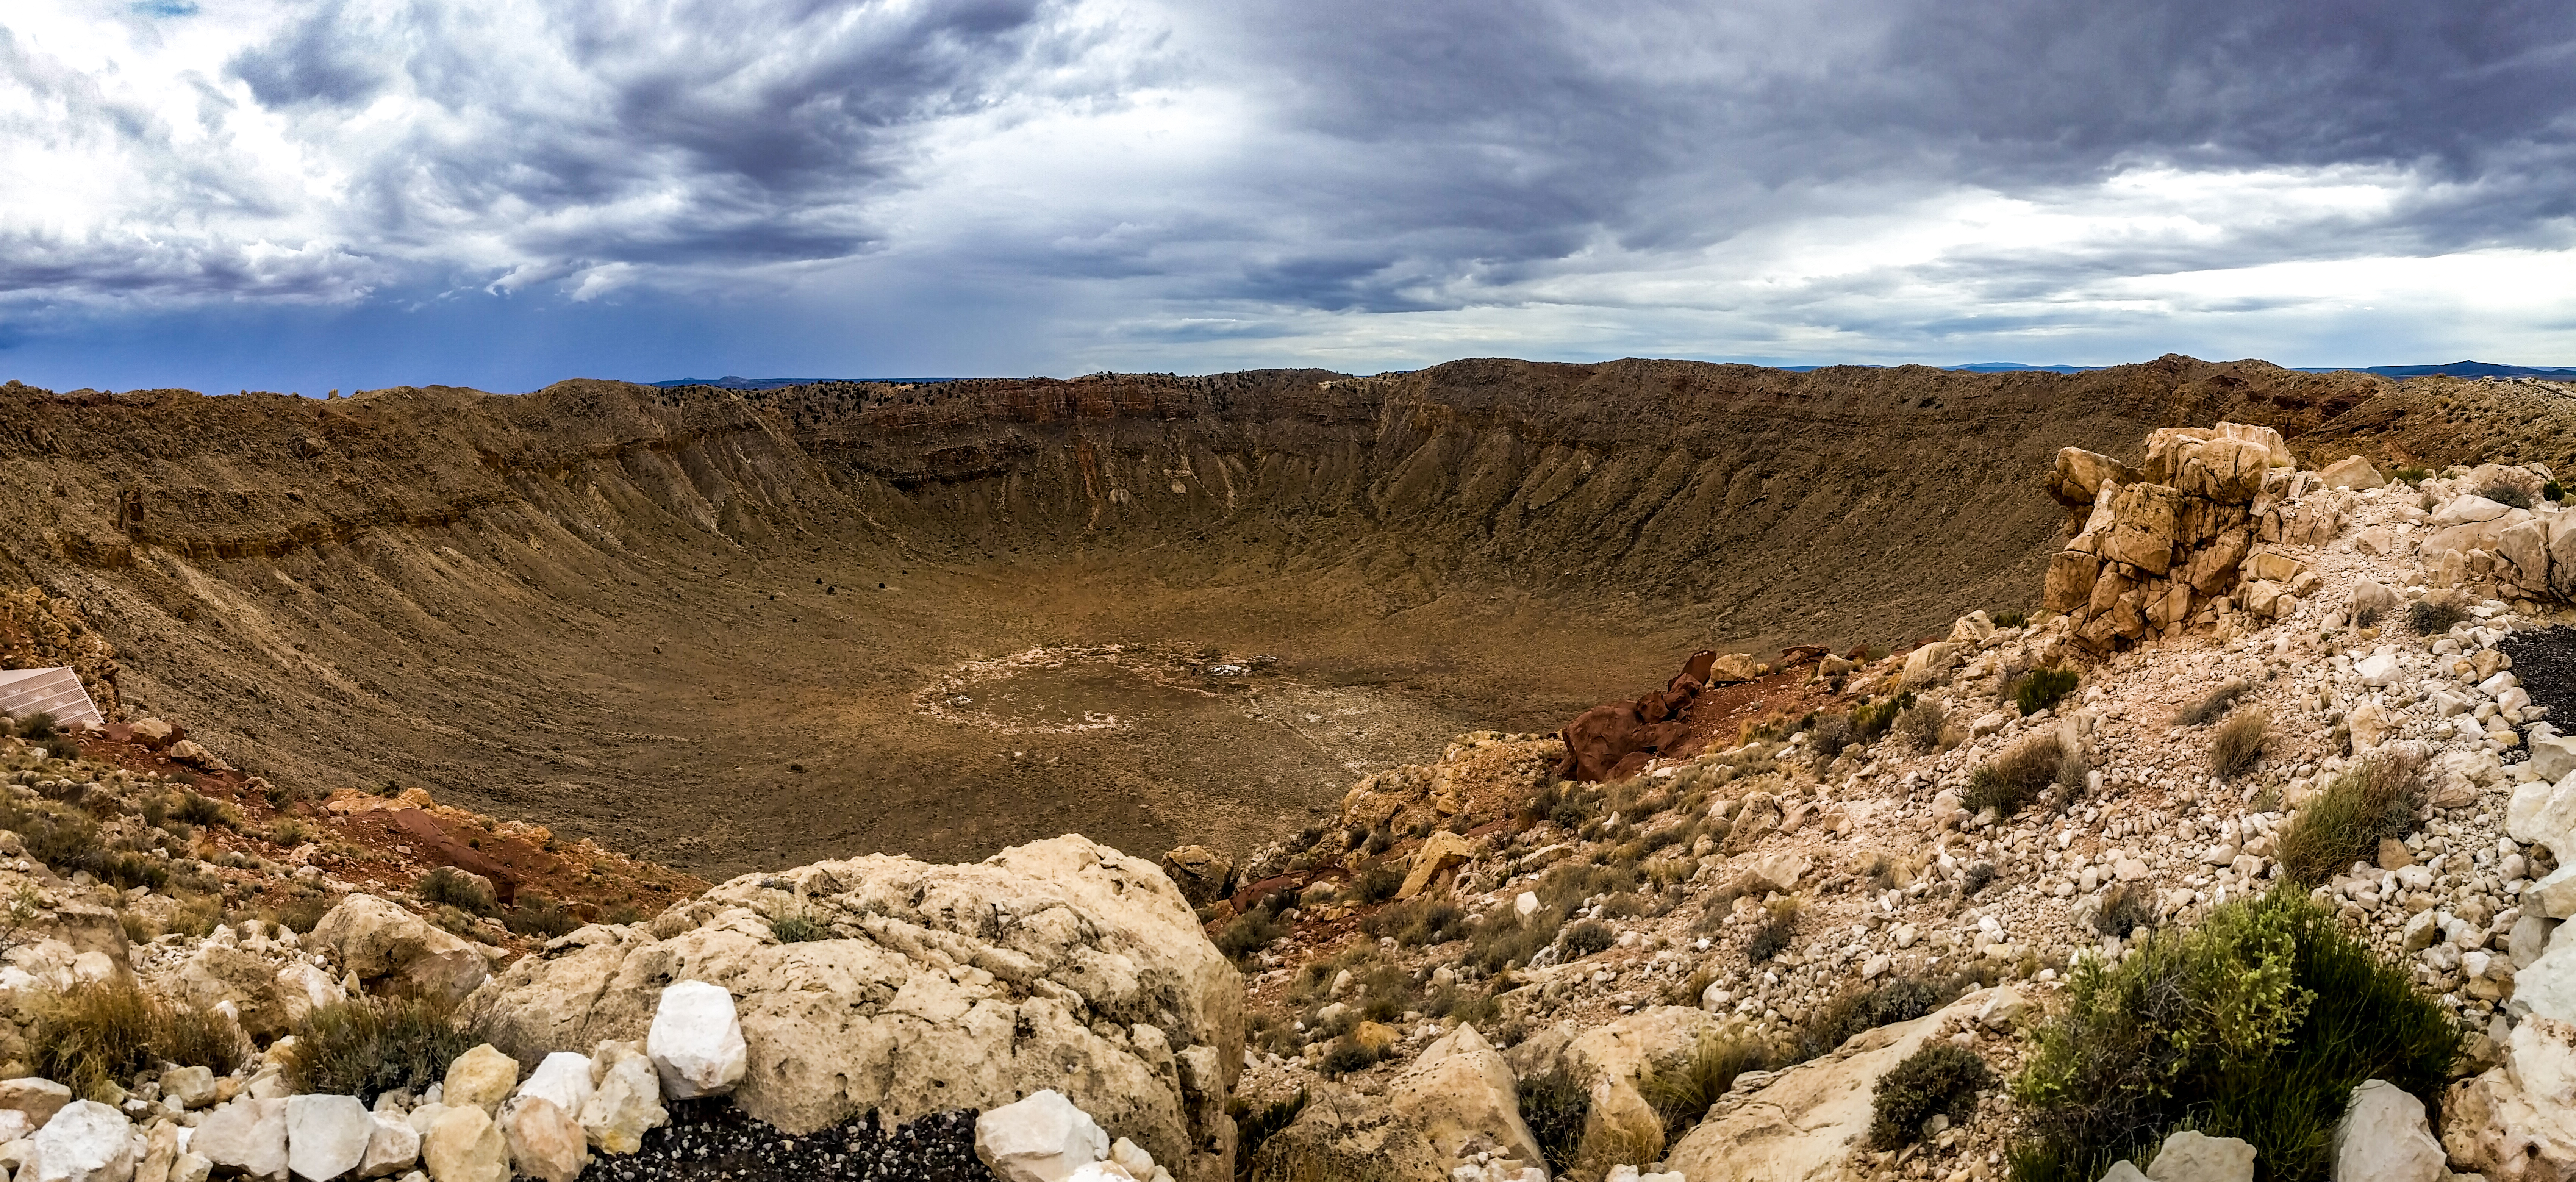 View from the rim showing vast expanse of huge crater.